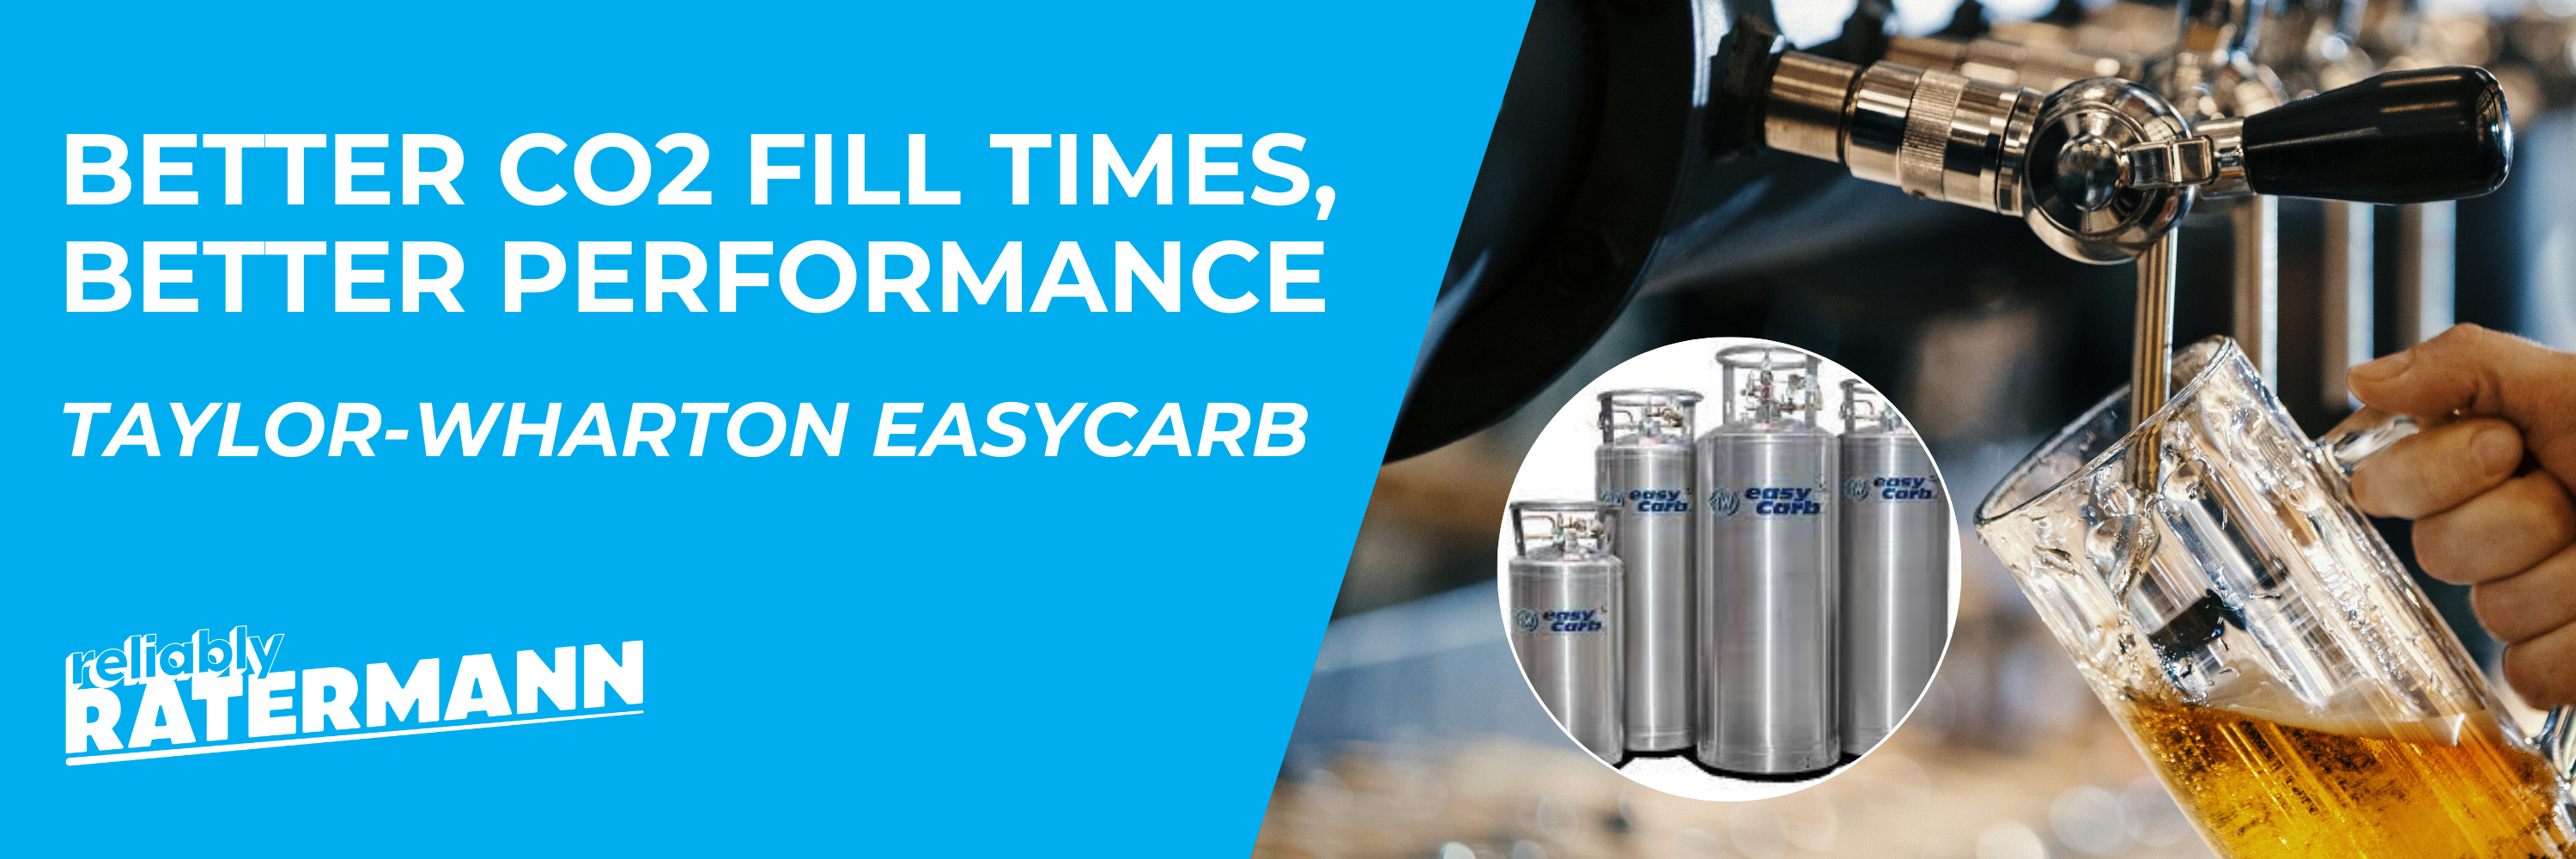 Better CO2 Fill Times, Better Performance with Taylor-Wharton EasyCarb